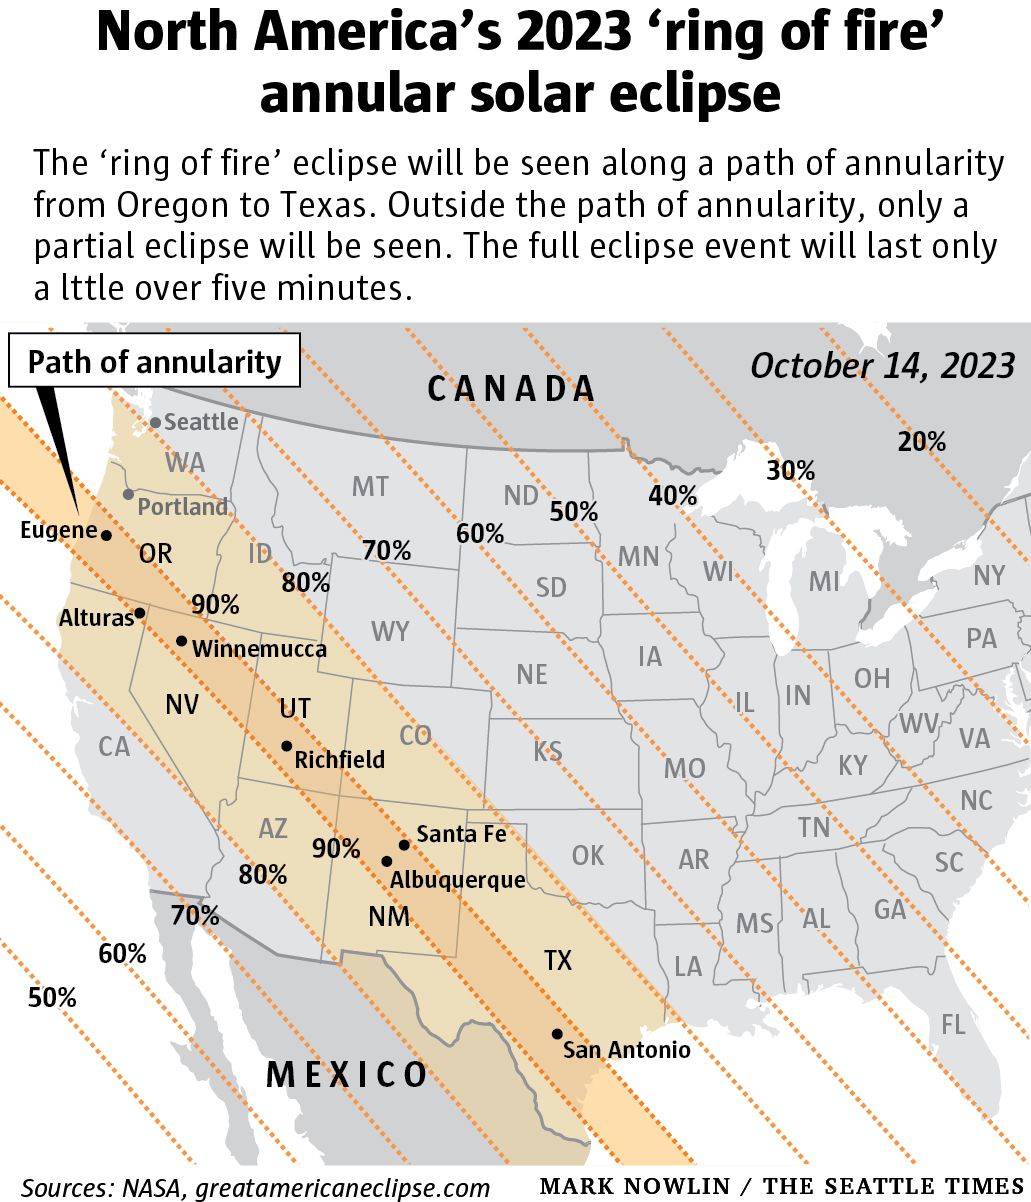 10 Things about the April 2023 Total Solar Eclipse